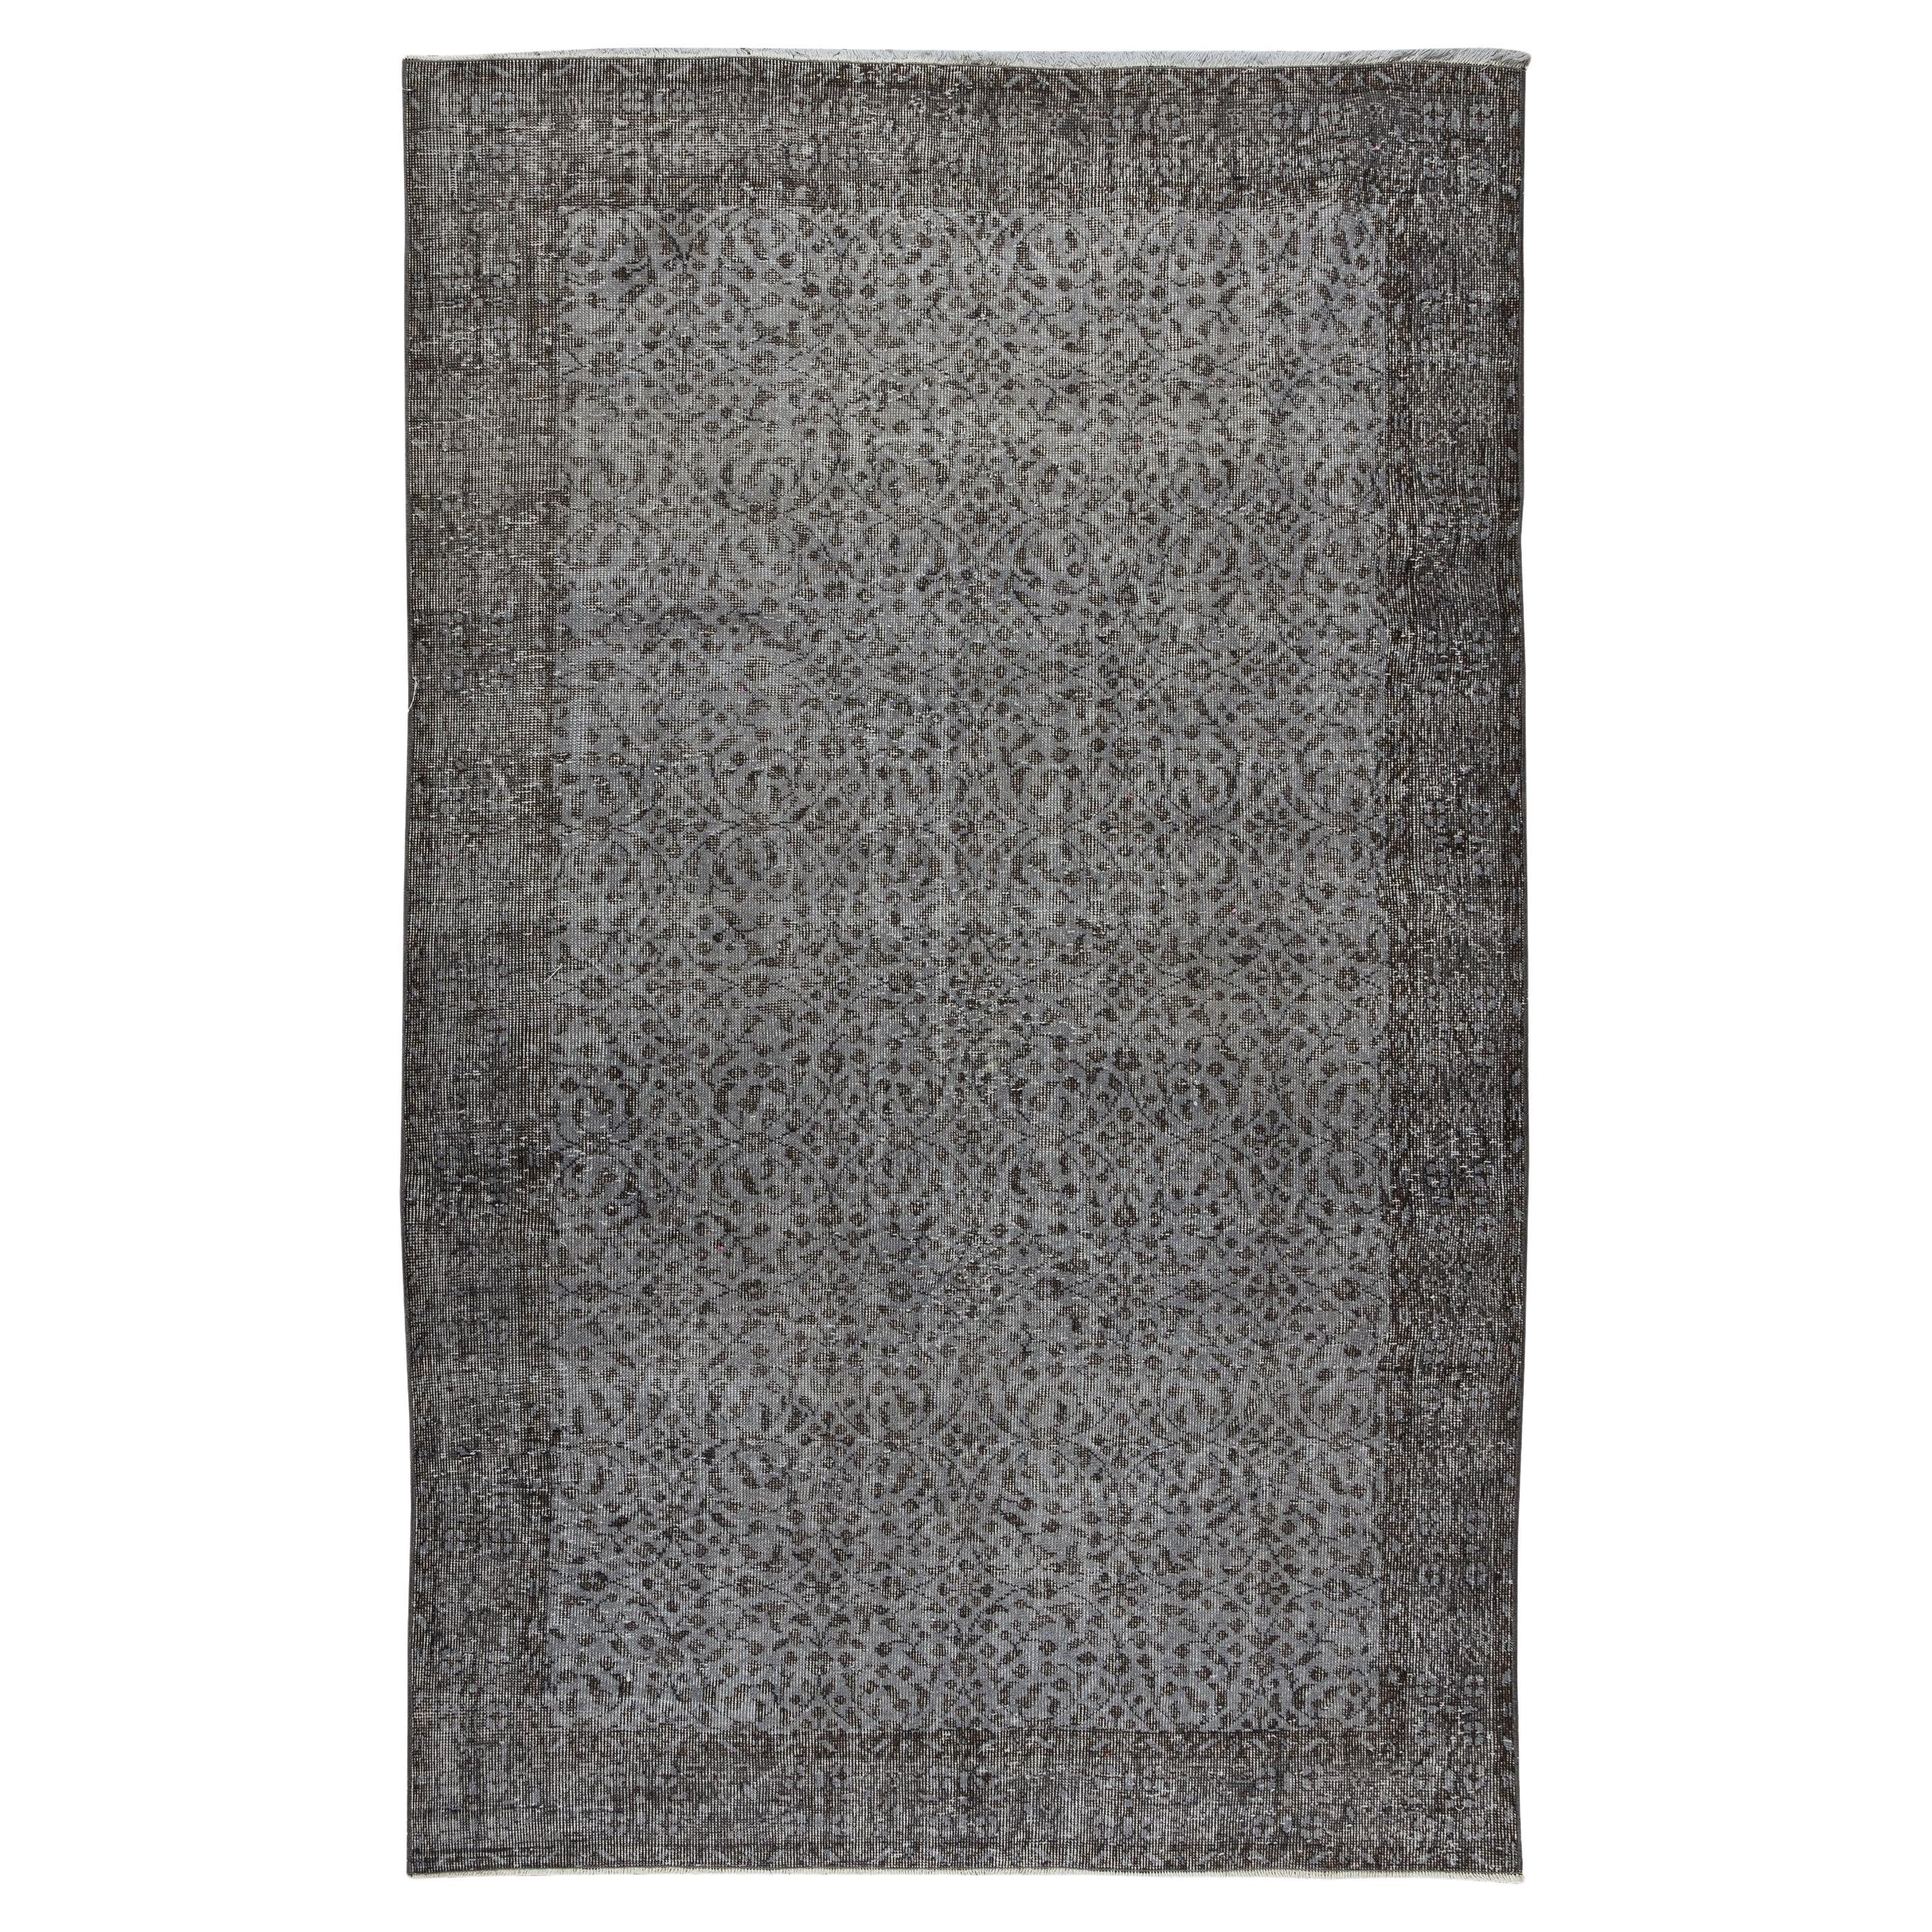 5.6x8.9 Ft Contemporary Turkish Rug Re-Dyed in Gray, Vintage Turkish Wool Carpet